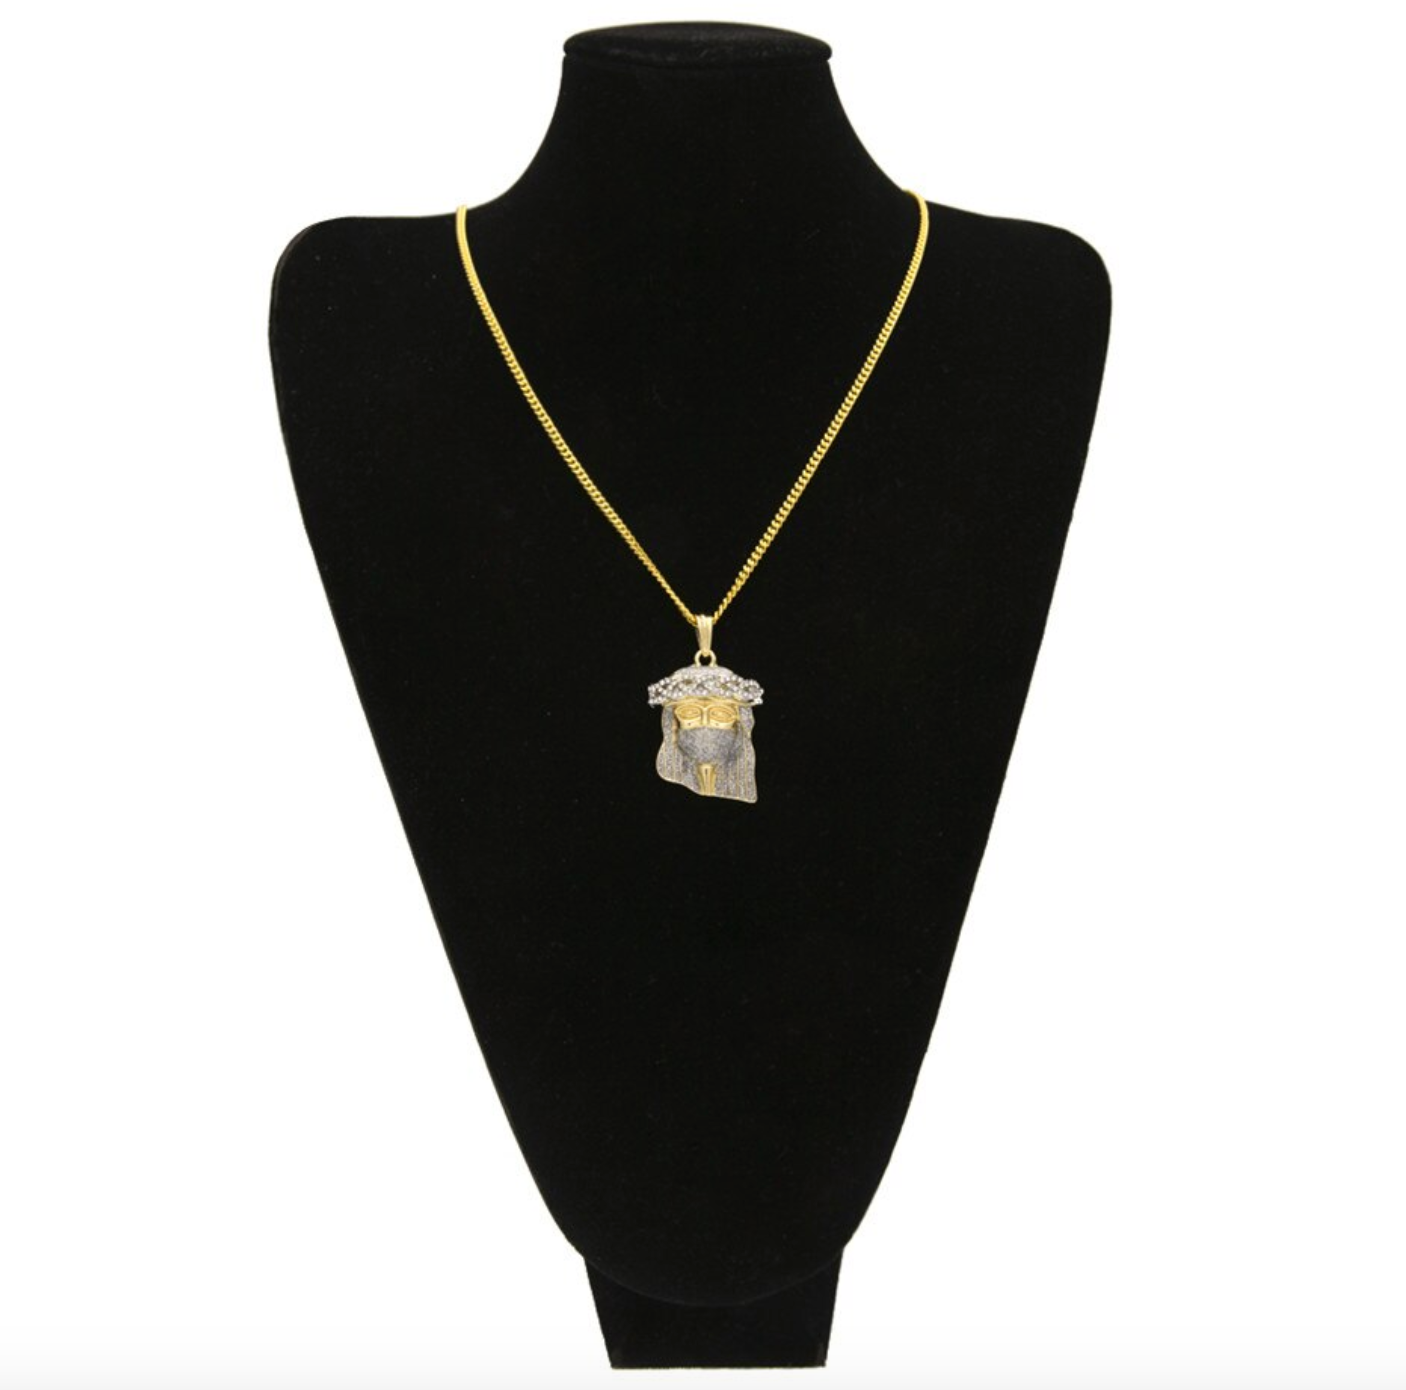 Jesus Ski Mask Chain Simulated Diamond Gold Color Metal Alloy Jesus Face Necklace Silver Robber Hip Hop Jewelry 24in.